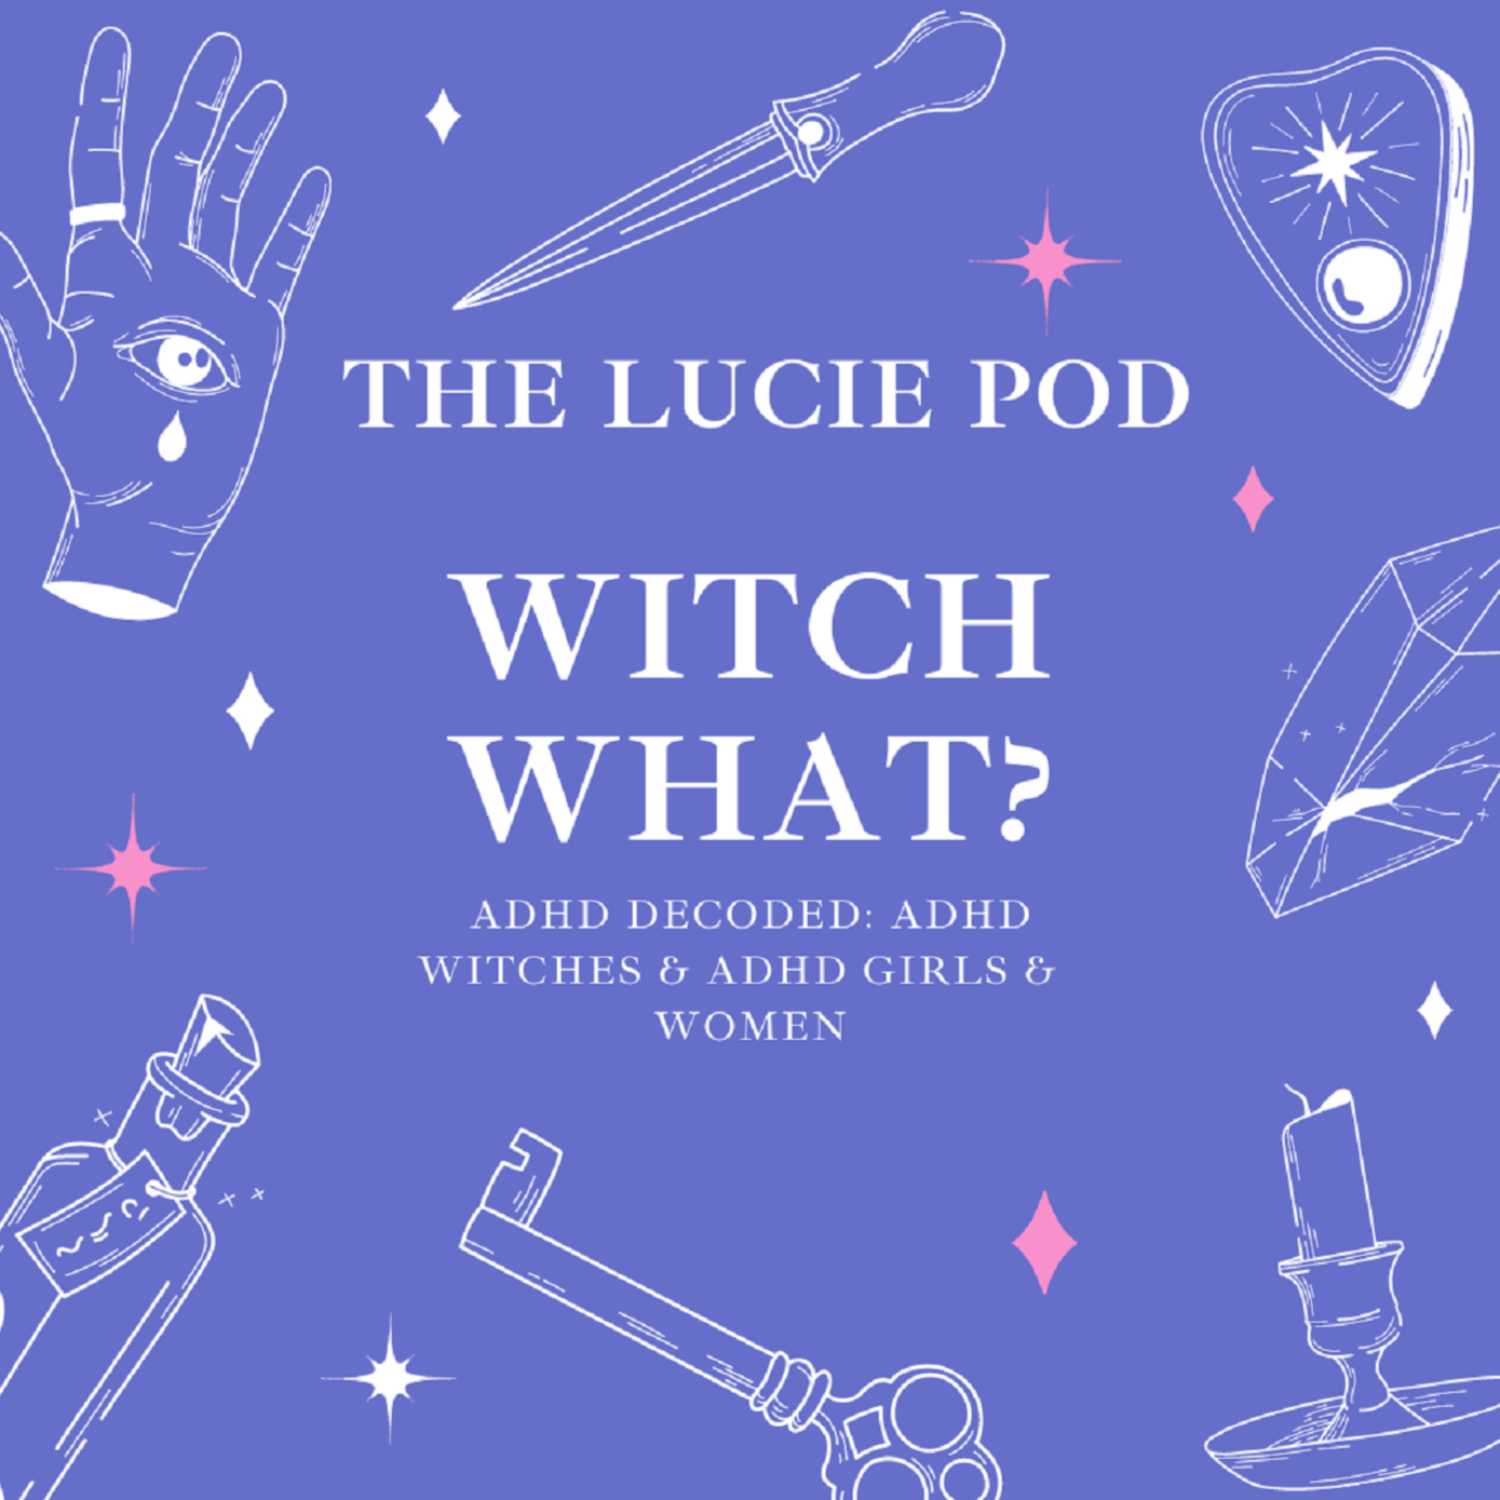 ADHD Decoded: Witch What? ADHD Witches!